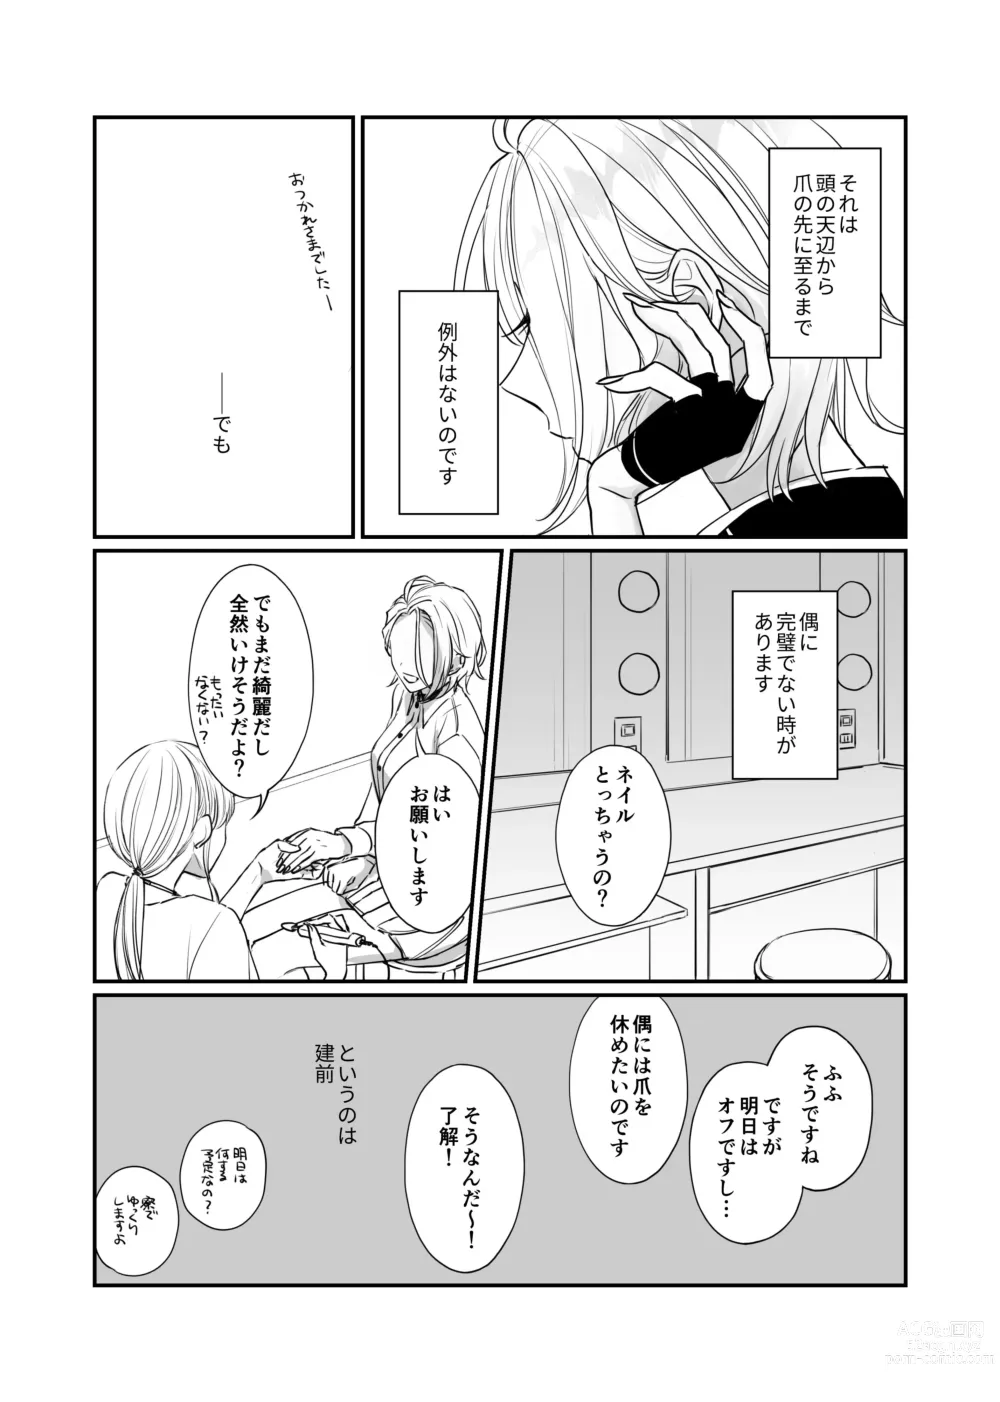 Page 4 of doujinshi FH2T